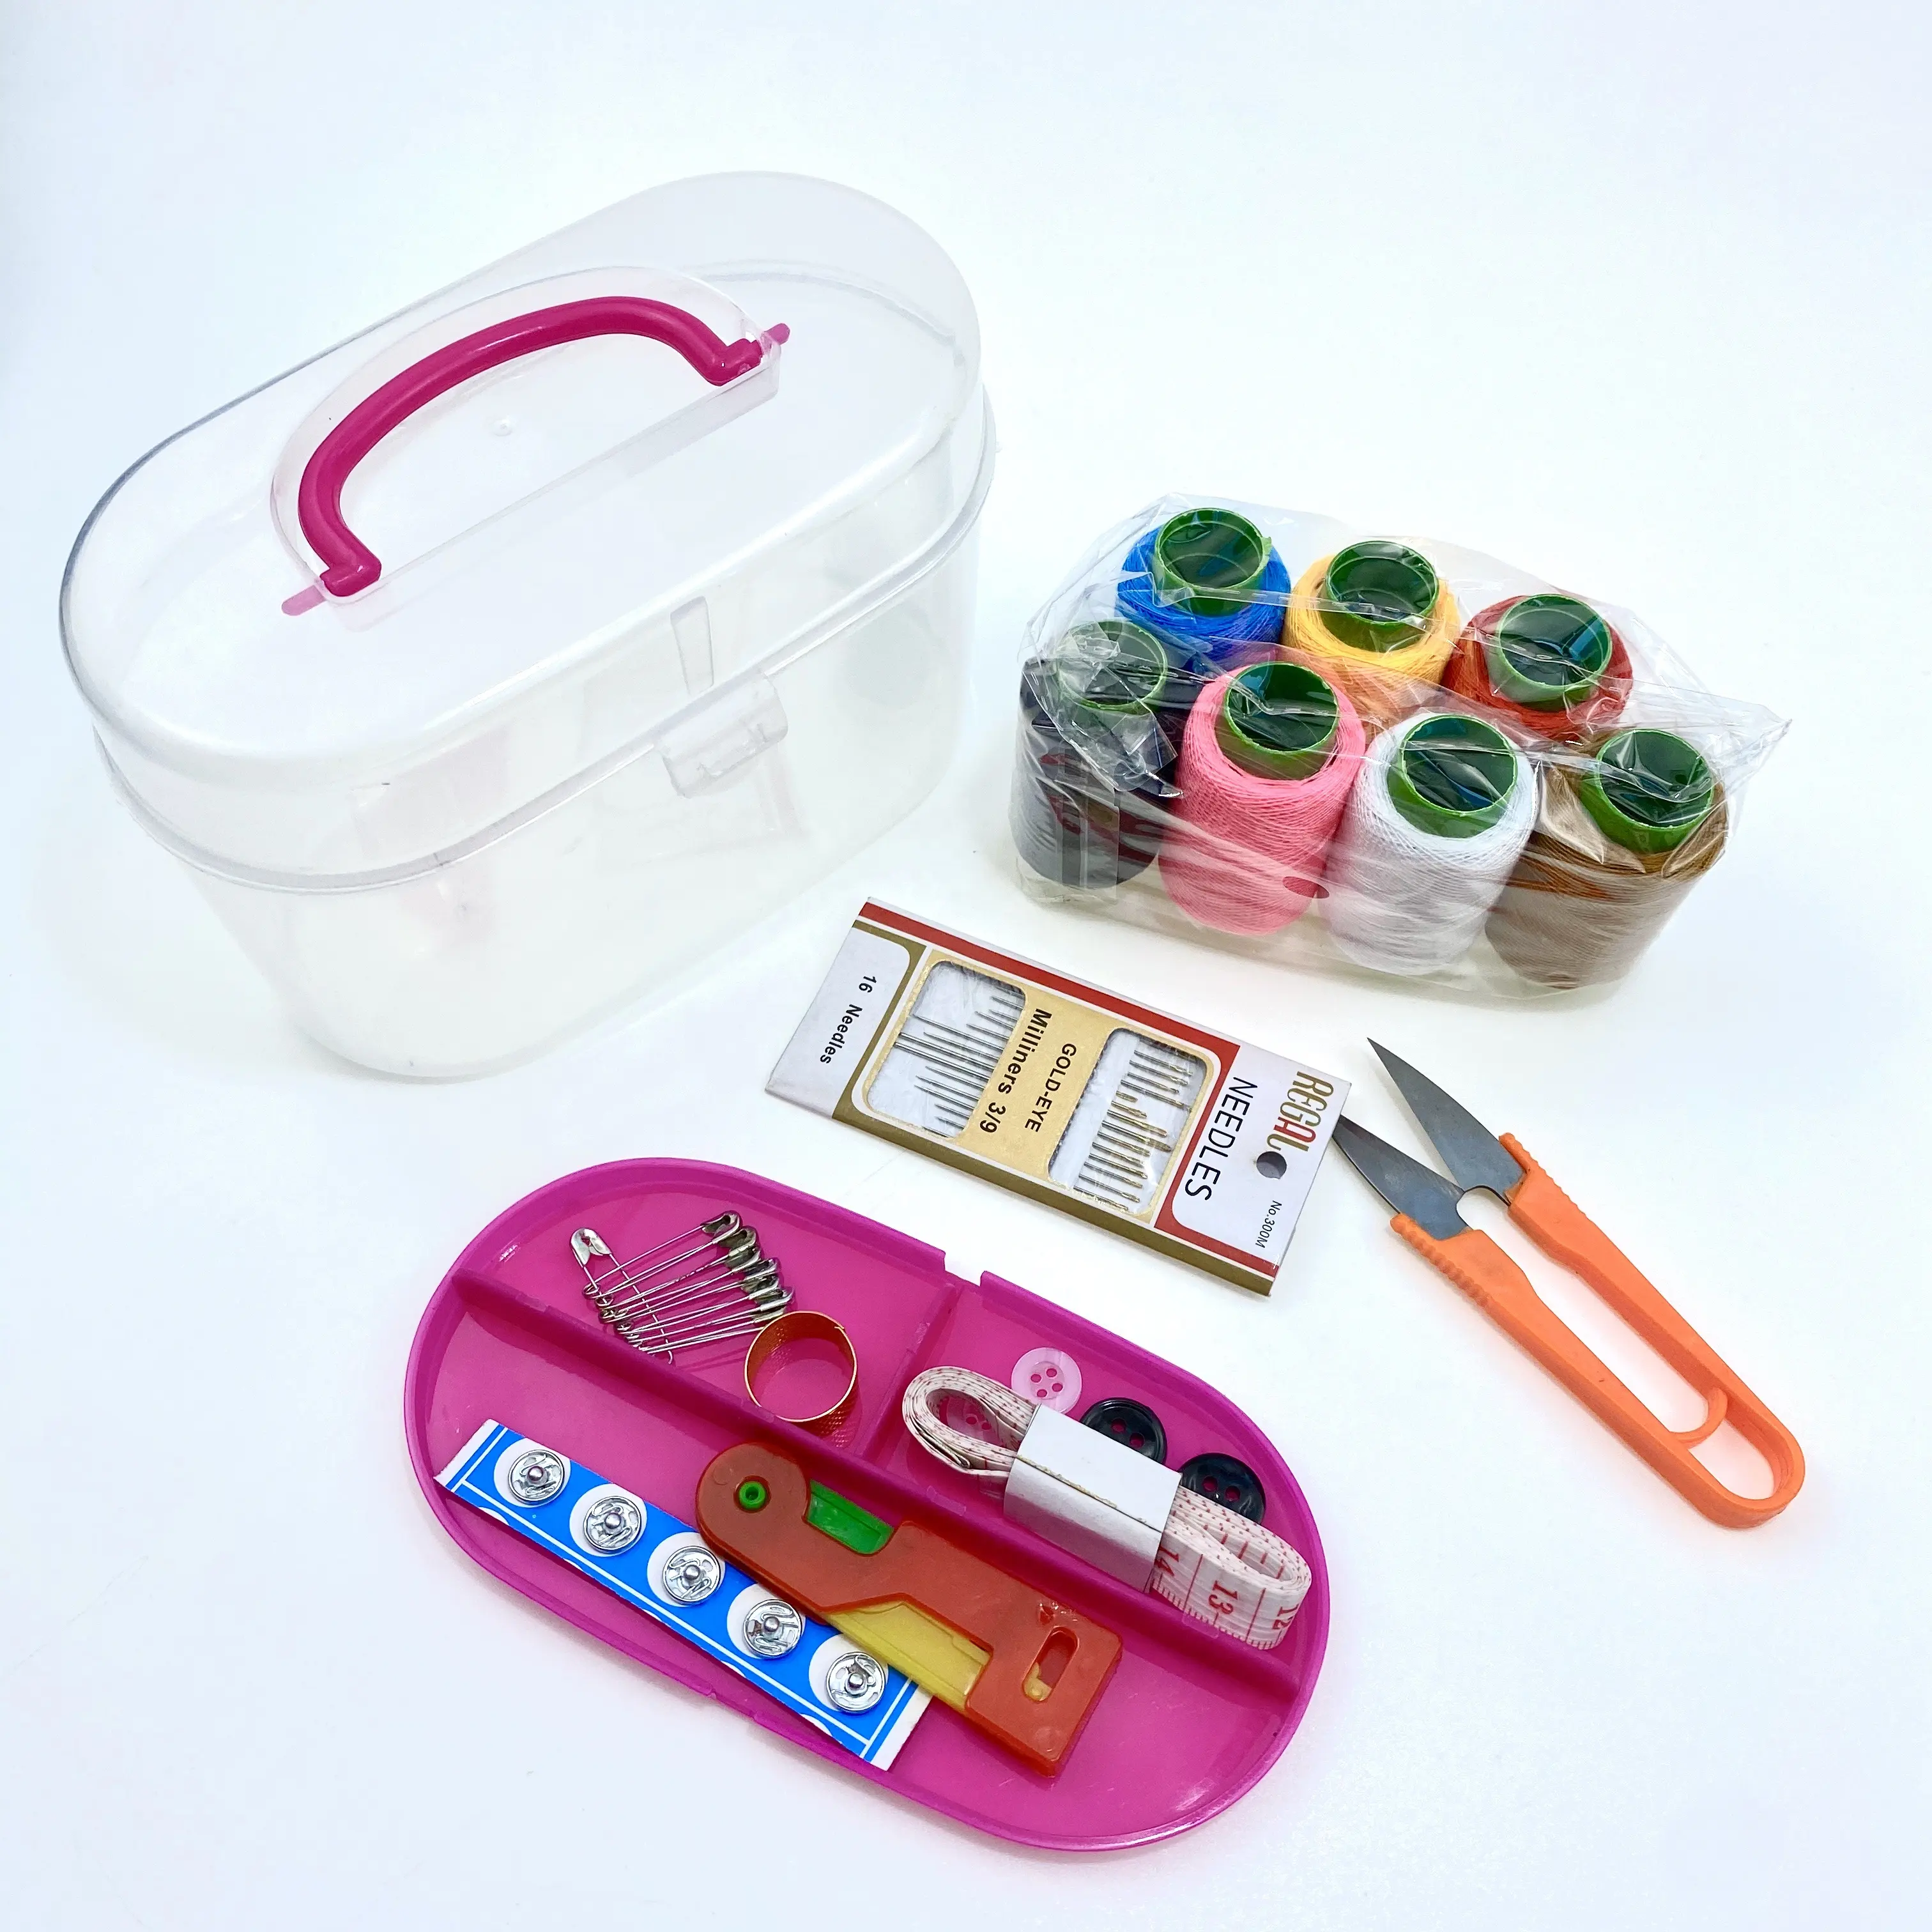 Traveler Beginners Sewing Kits for Adults Emergency JR.WHITE Deluxe Sewing Kit with 183 Premium Sewing Accessories College Students Kids Home Basic & Professional Sewing Needles and Thread